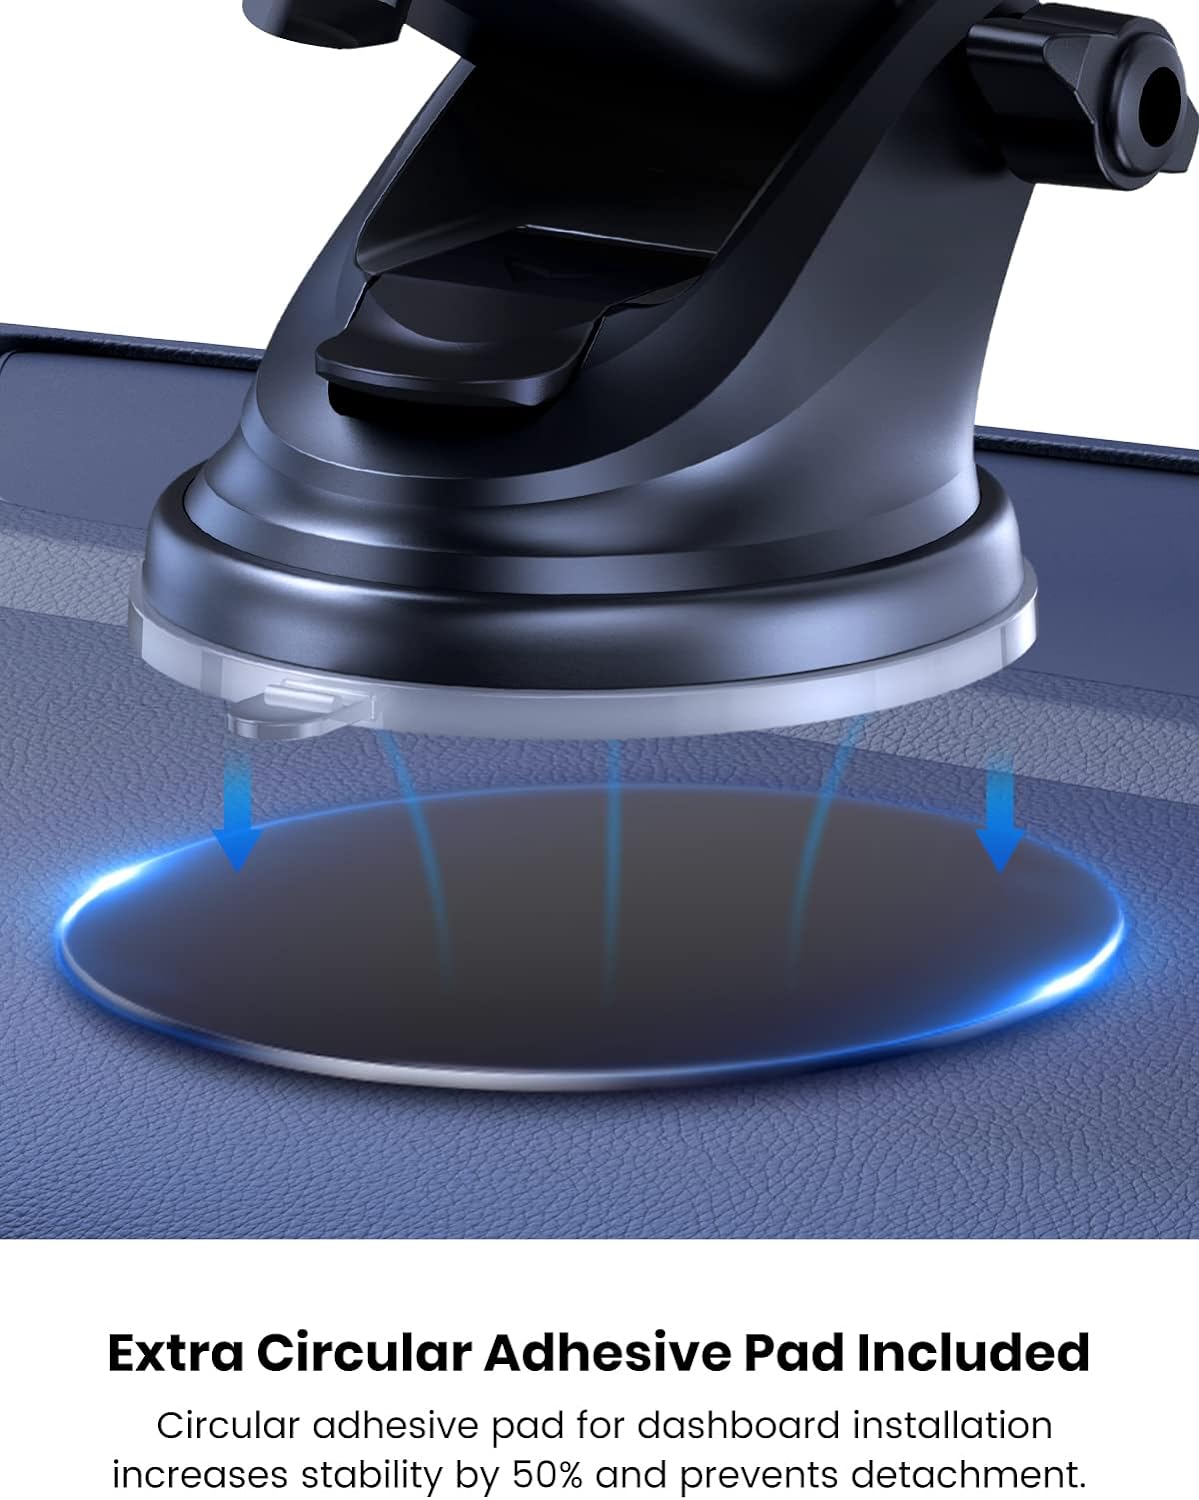 TOPK Car Phone Holder, [2023 Military - Grade Suction & Hook ] Phone Holder for Cars 4 in 1 Super Stable Car Phone Mount for Car Dashboard/Windscreen/Air Vent Compatible with All Mobile Phones - Amazing Gadgets Outlet